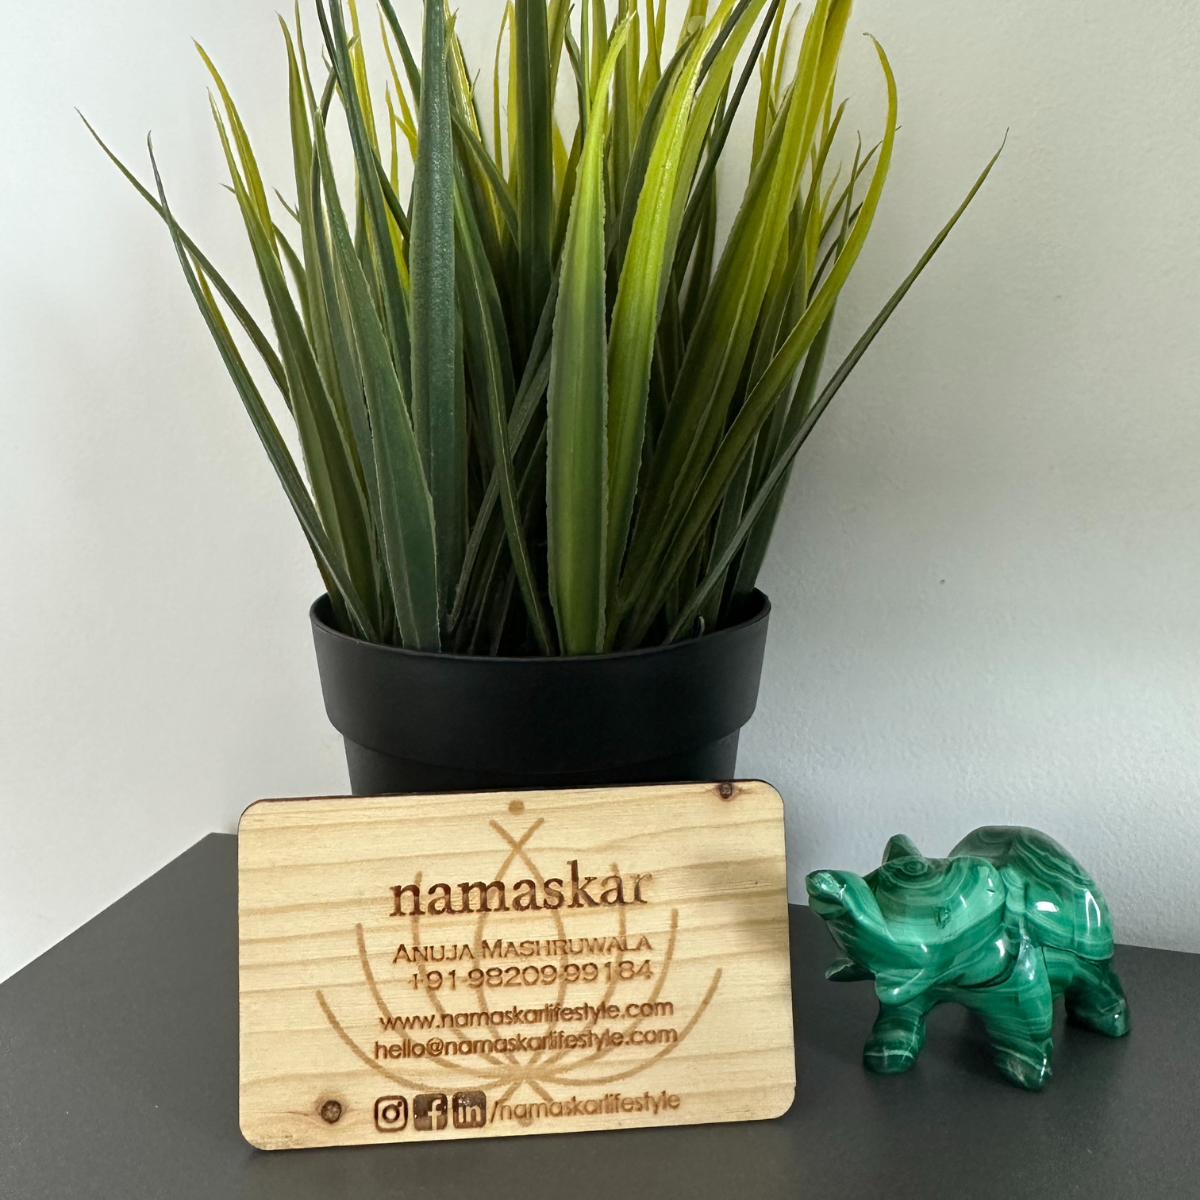 Wooden Personalized Visiting Cards | Upcycled pinewood & Biodegradable